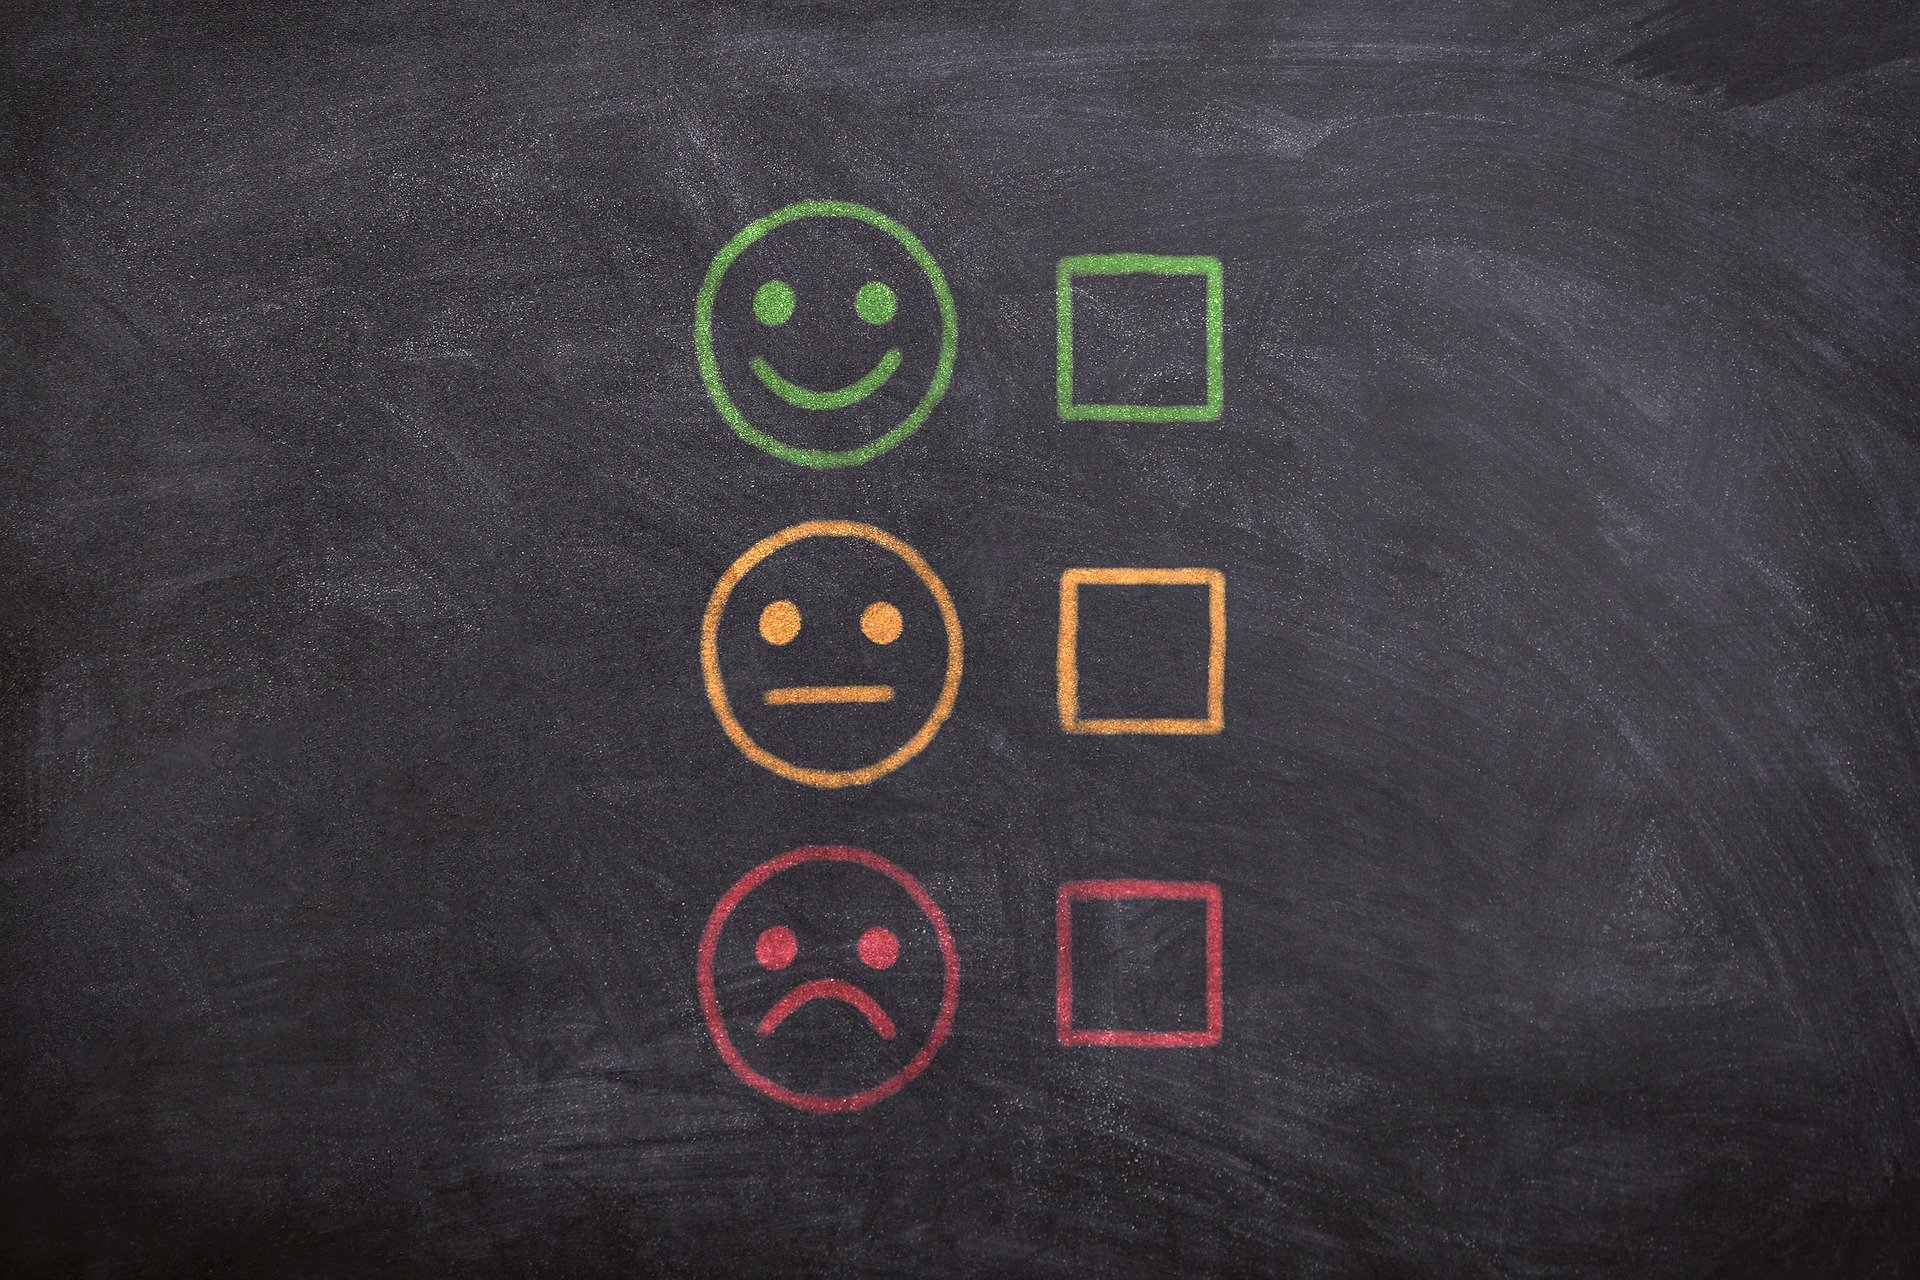 Review smiley faces on chalkboard